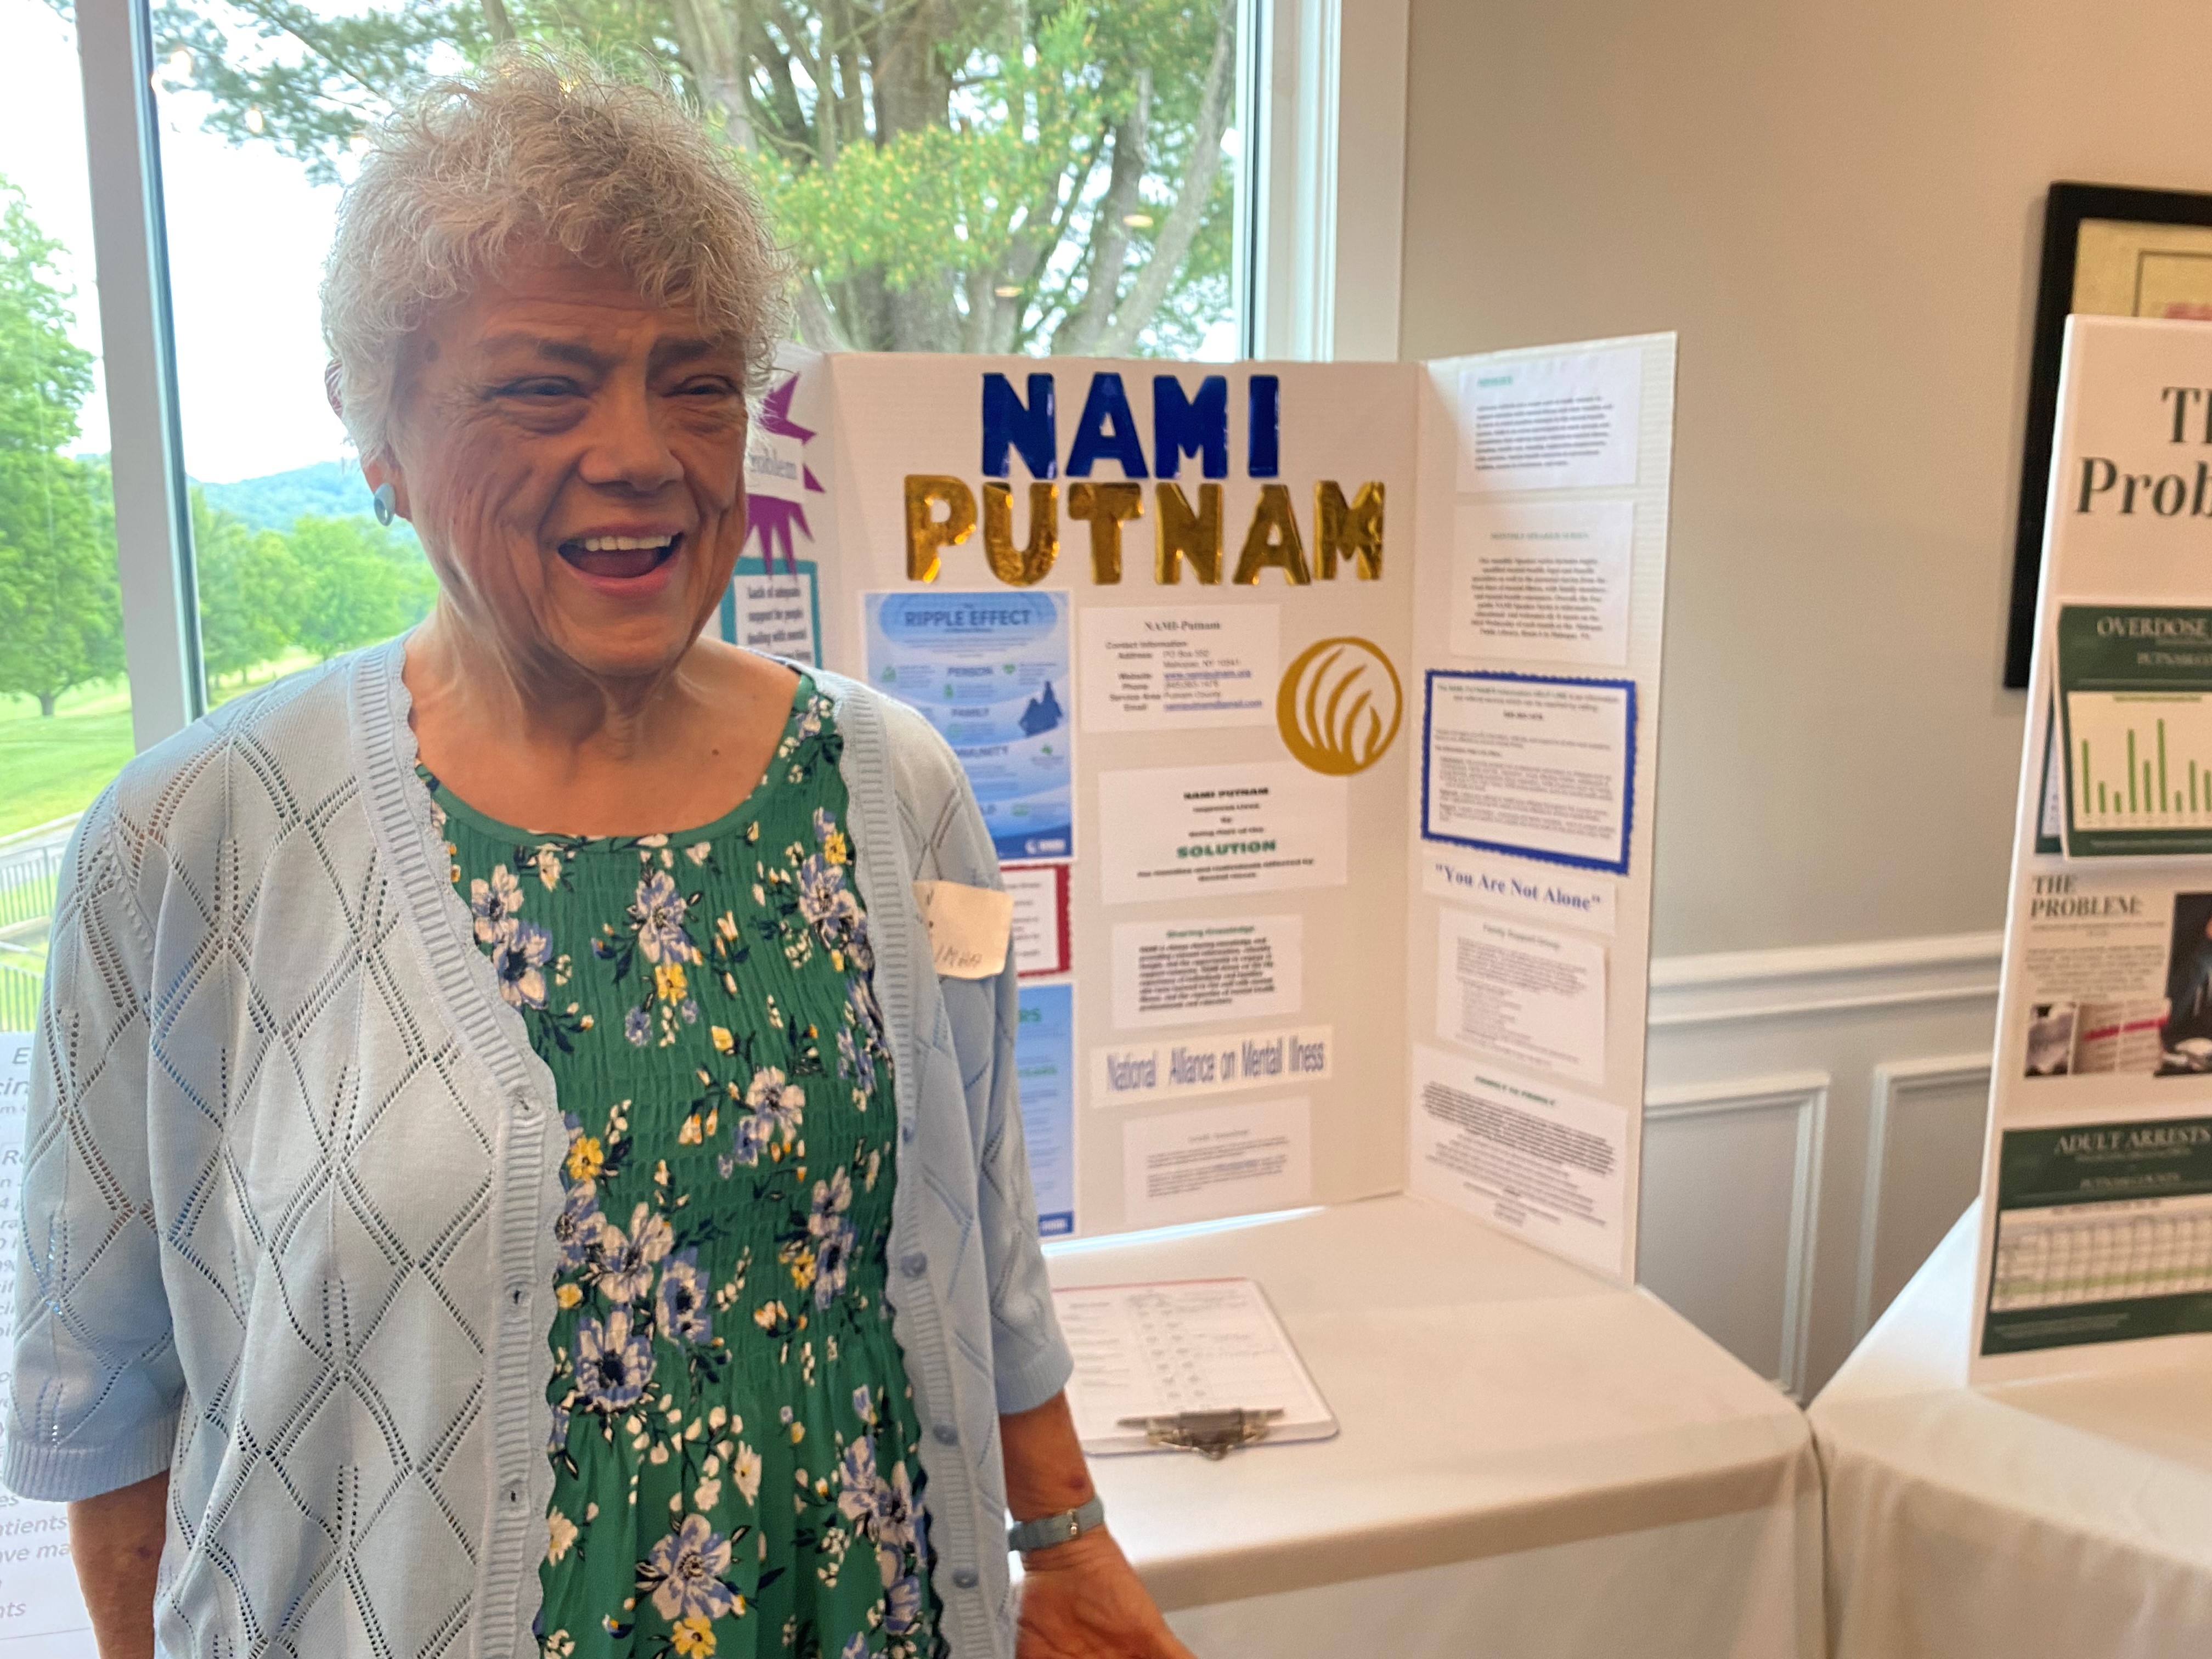 Karen Pilner, a retired nurse practitioner in psychiatry, has been working in the behavioral health field for more than five decades. She may be officially retired, but is busier than ever, serving on multiple boards, including the Board of Directors of CoveCare, the Mental Health Association, and the Putnam branch of NAMI (National Association of Mental Illness).